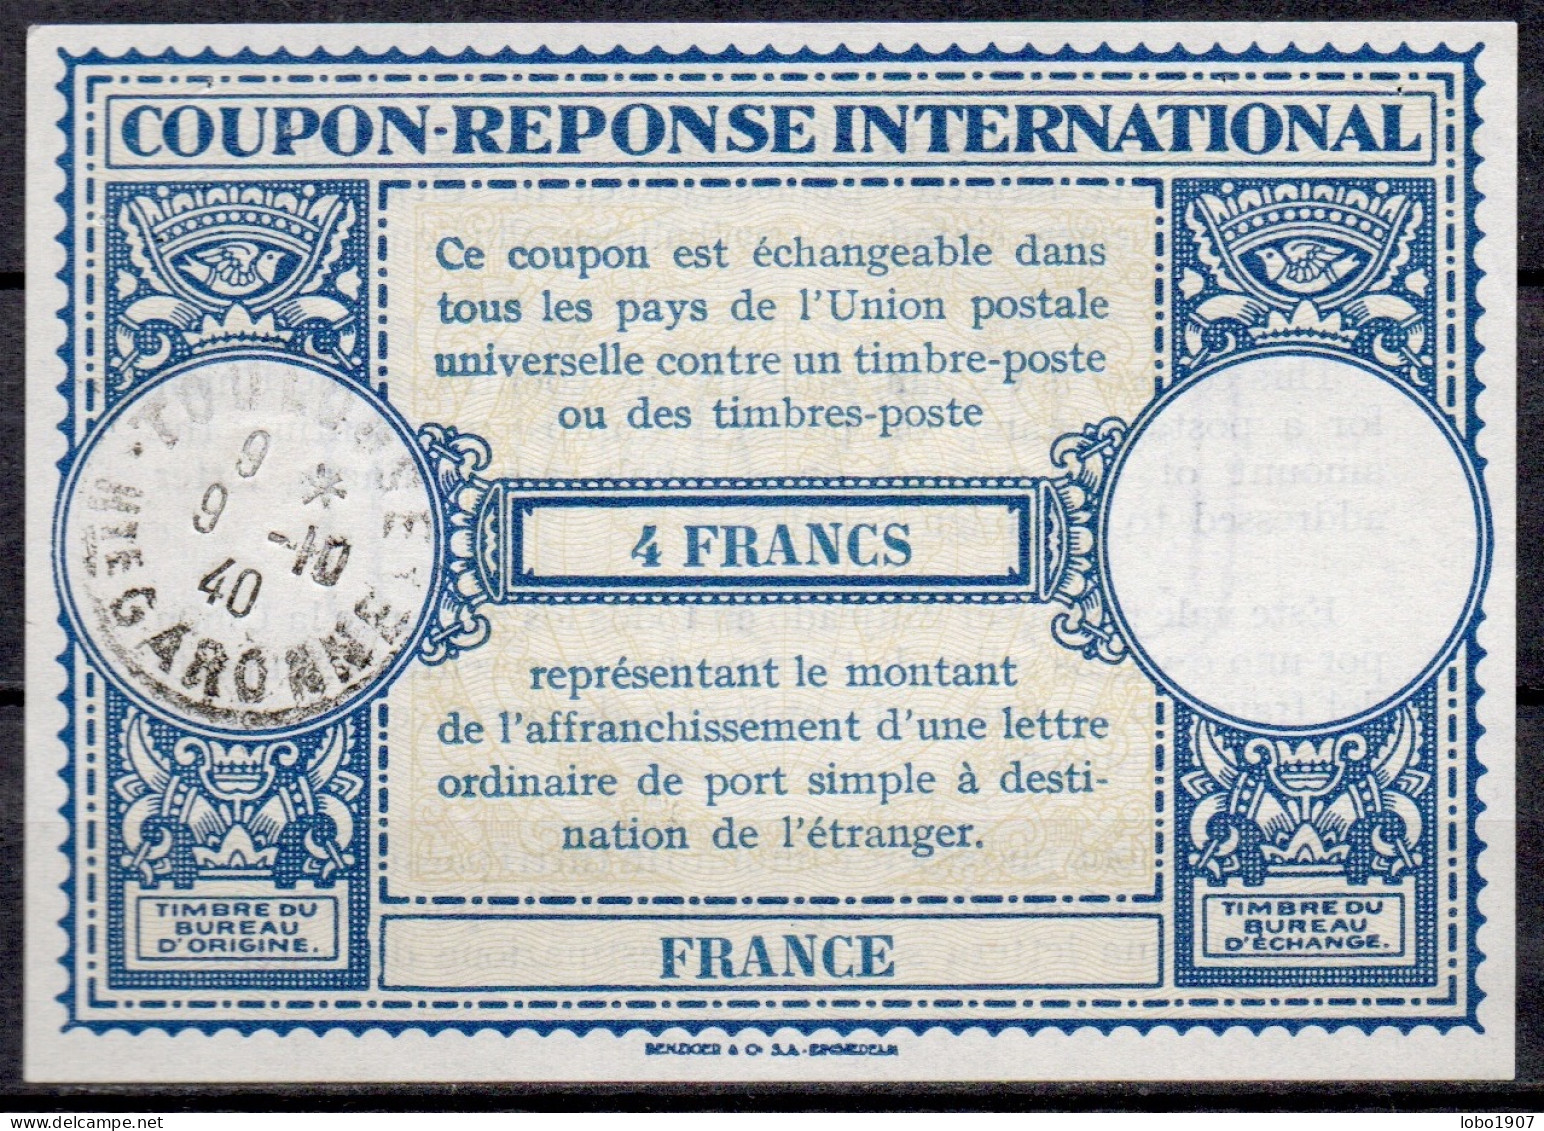 FRANCE  Rare Type Lo13ap  4 FRANCS  International Reply Coupon Reponse Antwortschein IRC IAS Cupon Respuesta O TOULOUSE - Coupons-réponse